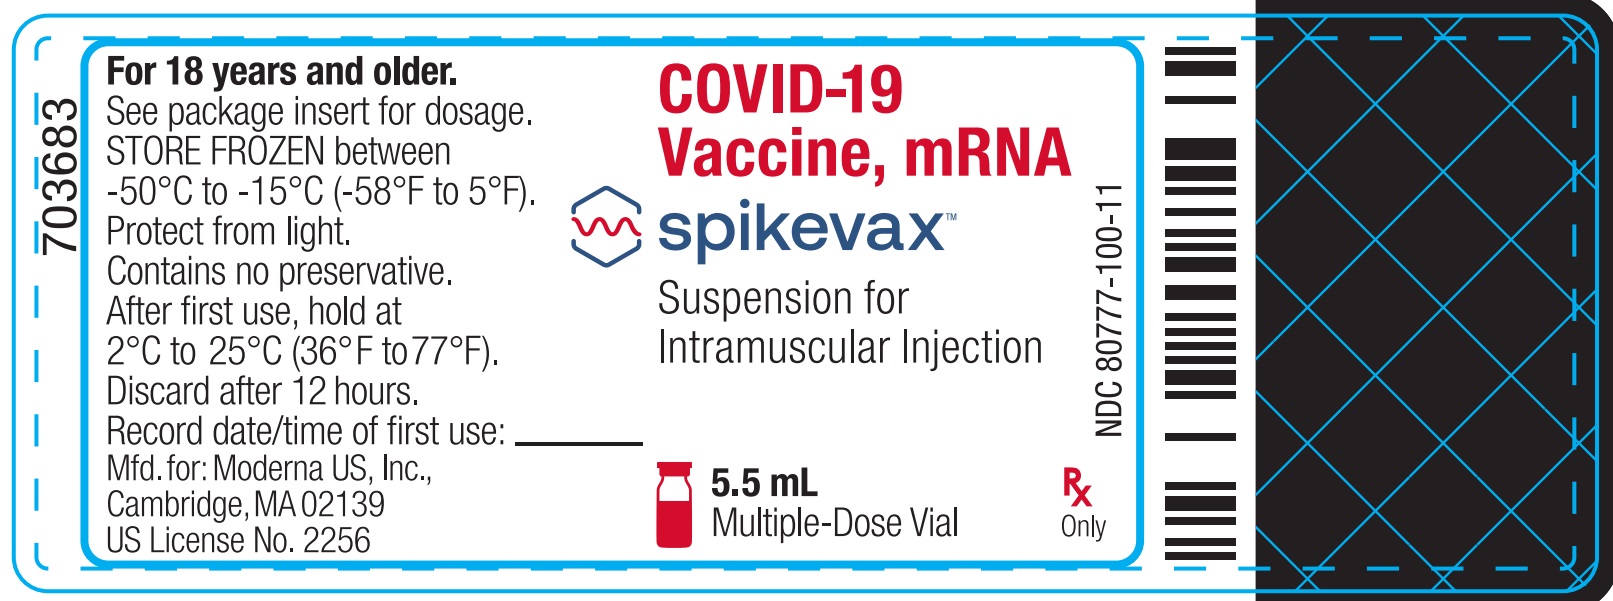 Spikevax (COVID-19 Vaccine, mRNA) Suspension for Intramuscular Injection Multiple-Dose Vial 5.5 mL